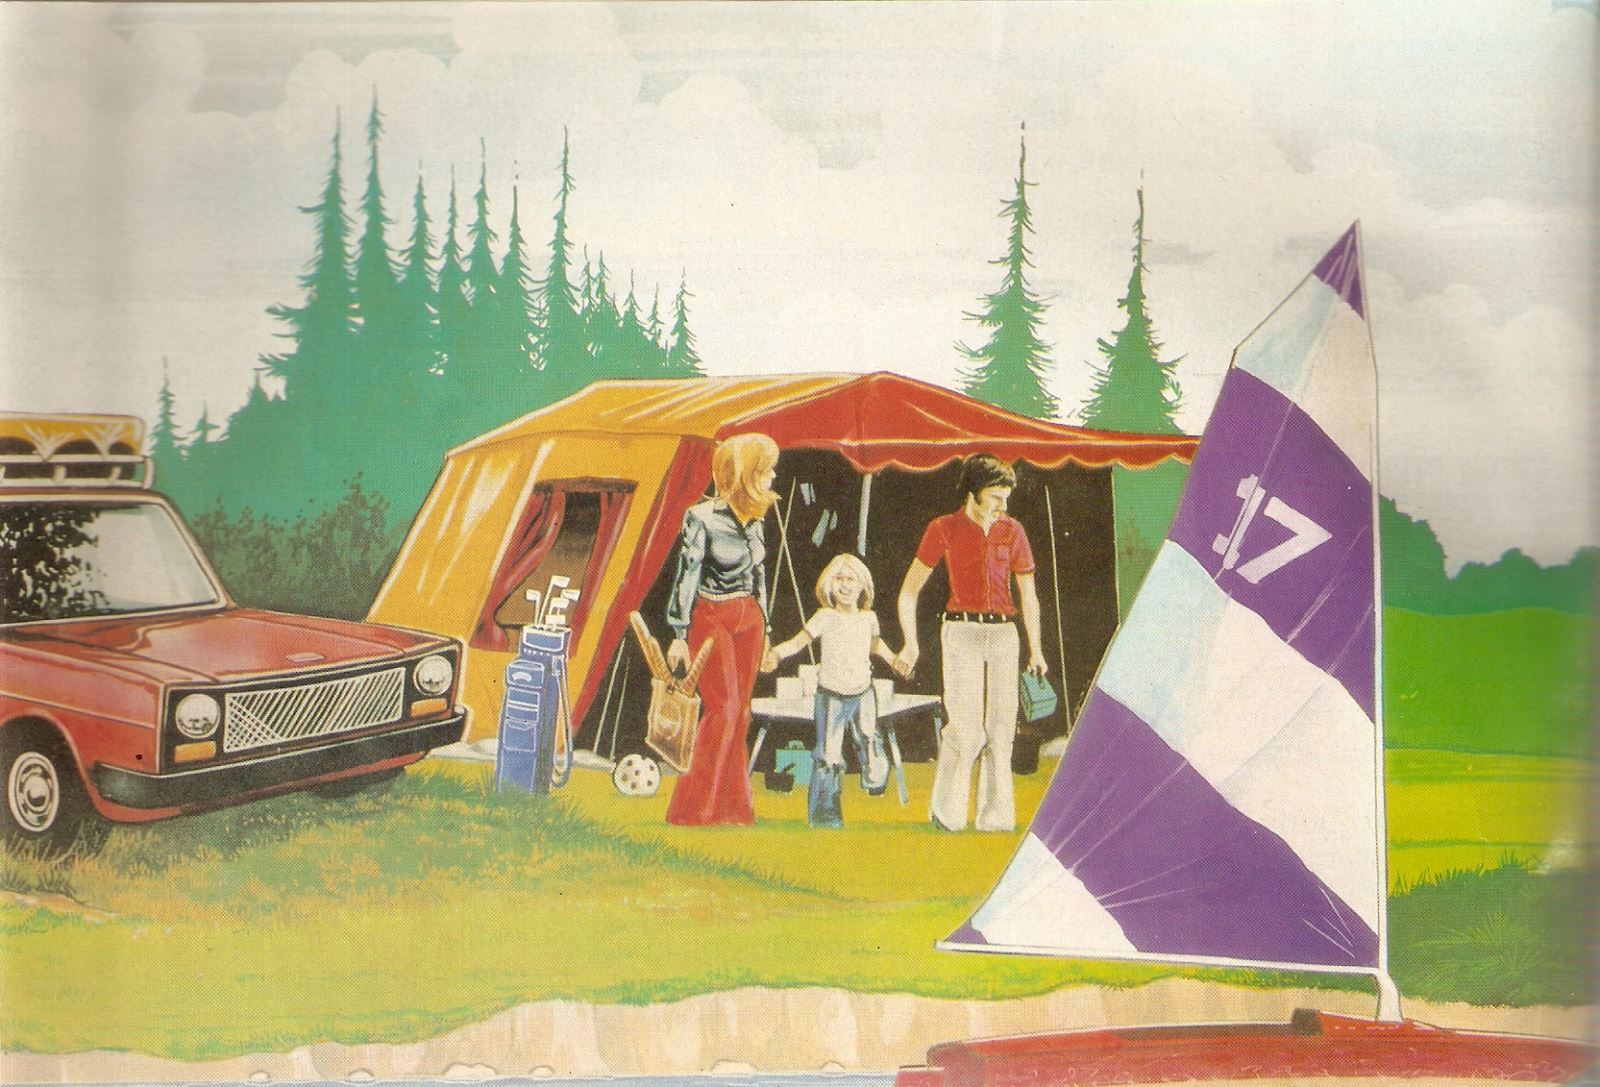 A drawing showing a family on a camping trip